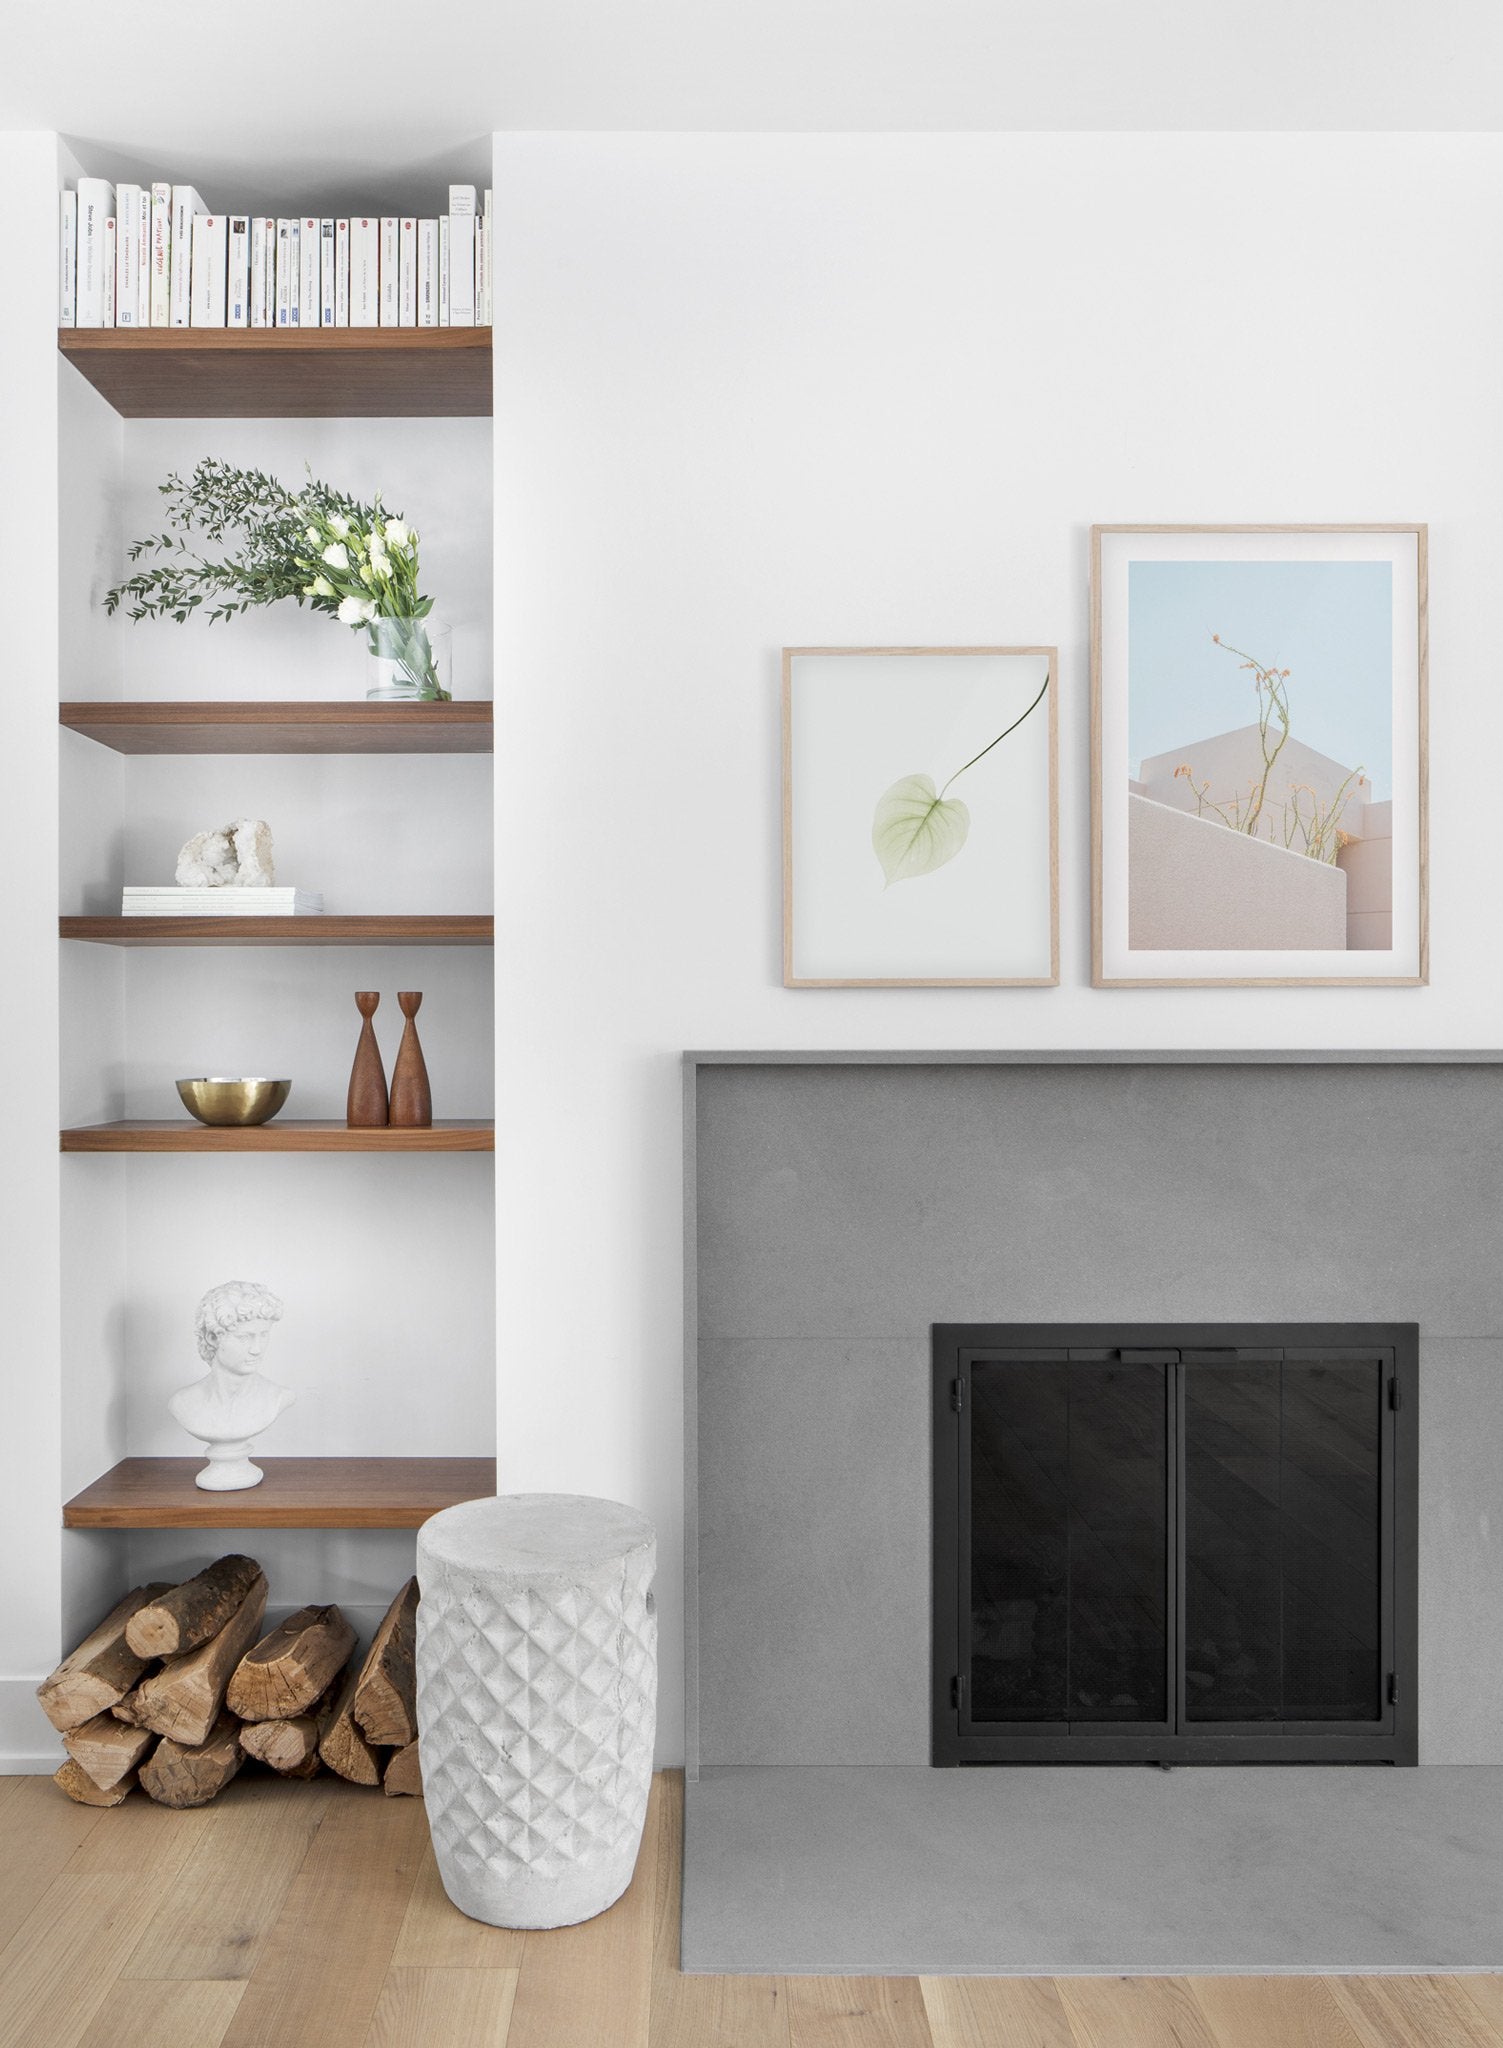 Feathery Plants modern minimalist photography poster by Opposite Wall - Living room with fireplace - Duo